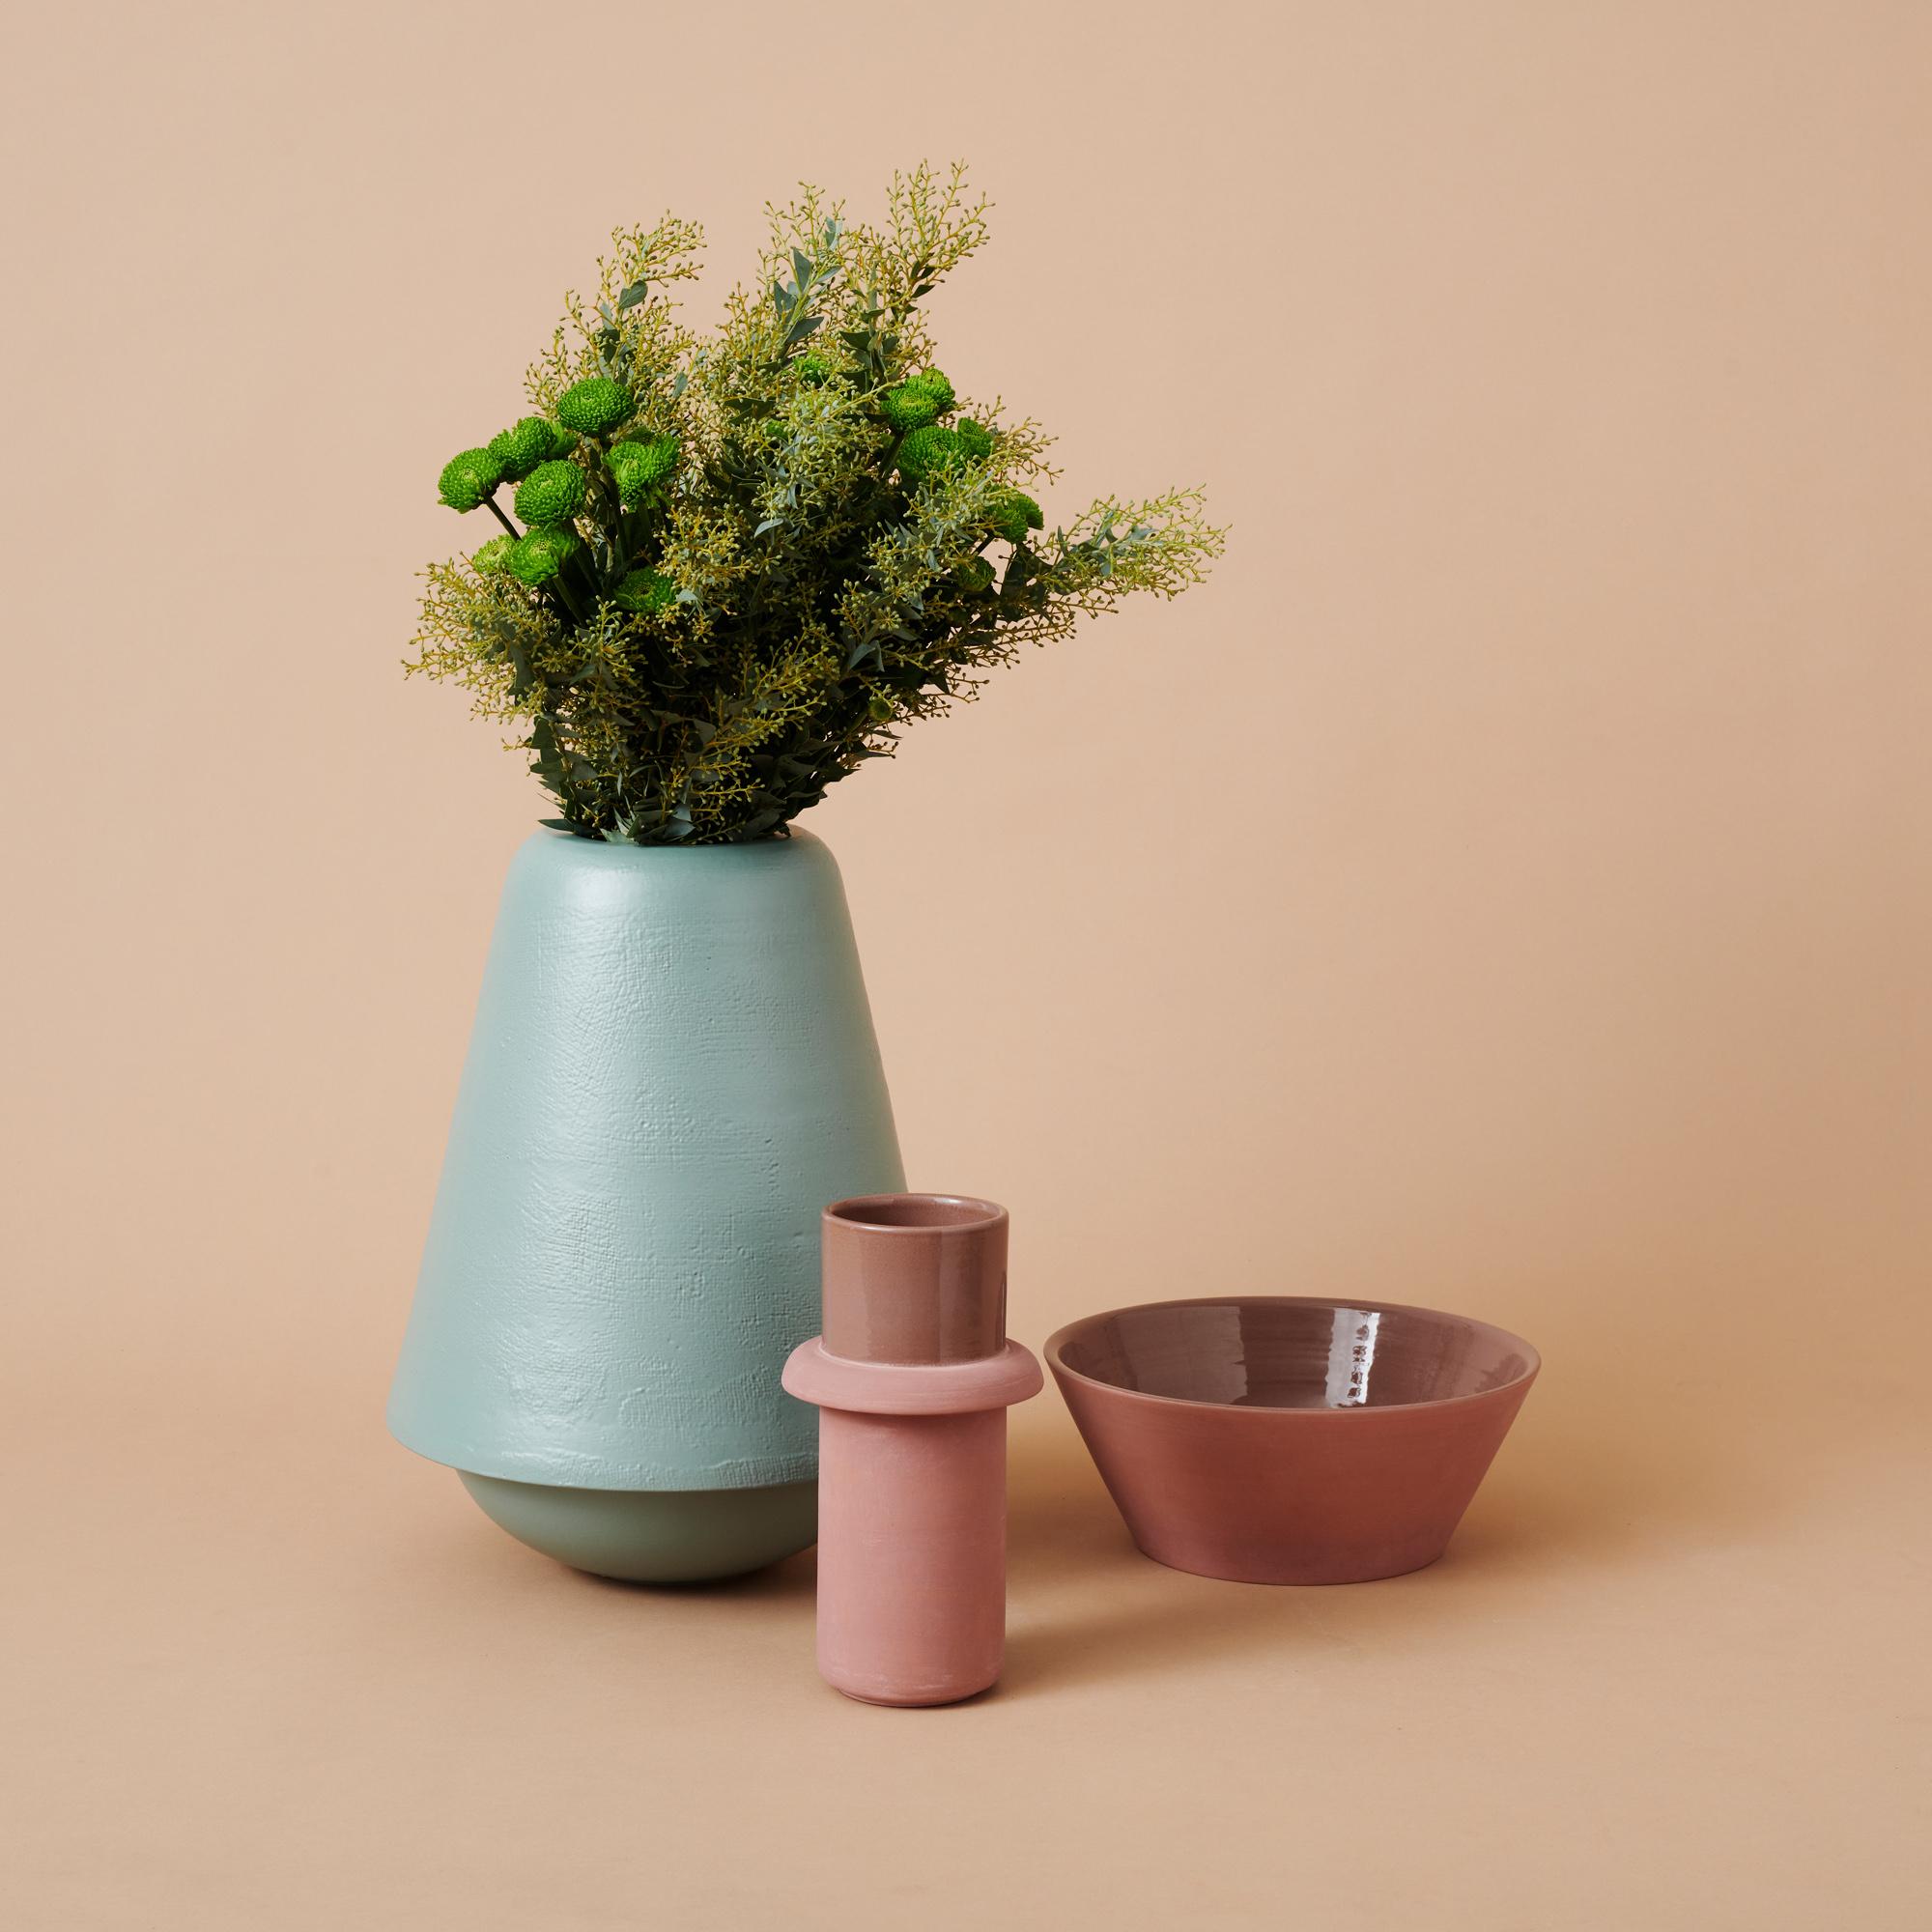 Designer: Jean-Christophe Clair, 2022
Manufacturer: Rometti

In the first collaboration with Umbrian-based Italian ceramic studio Rometti and its art director Jean-Christophe Clair, SP01 is launching a collection of mix-and-match ‘industrial